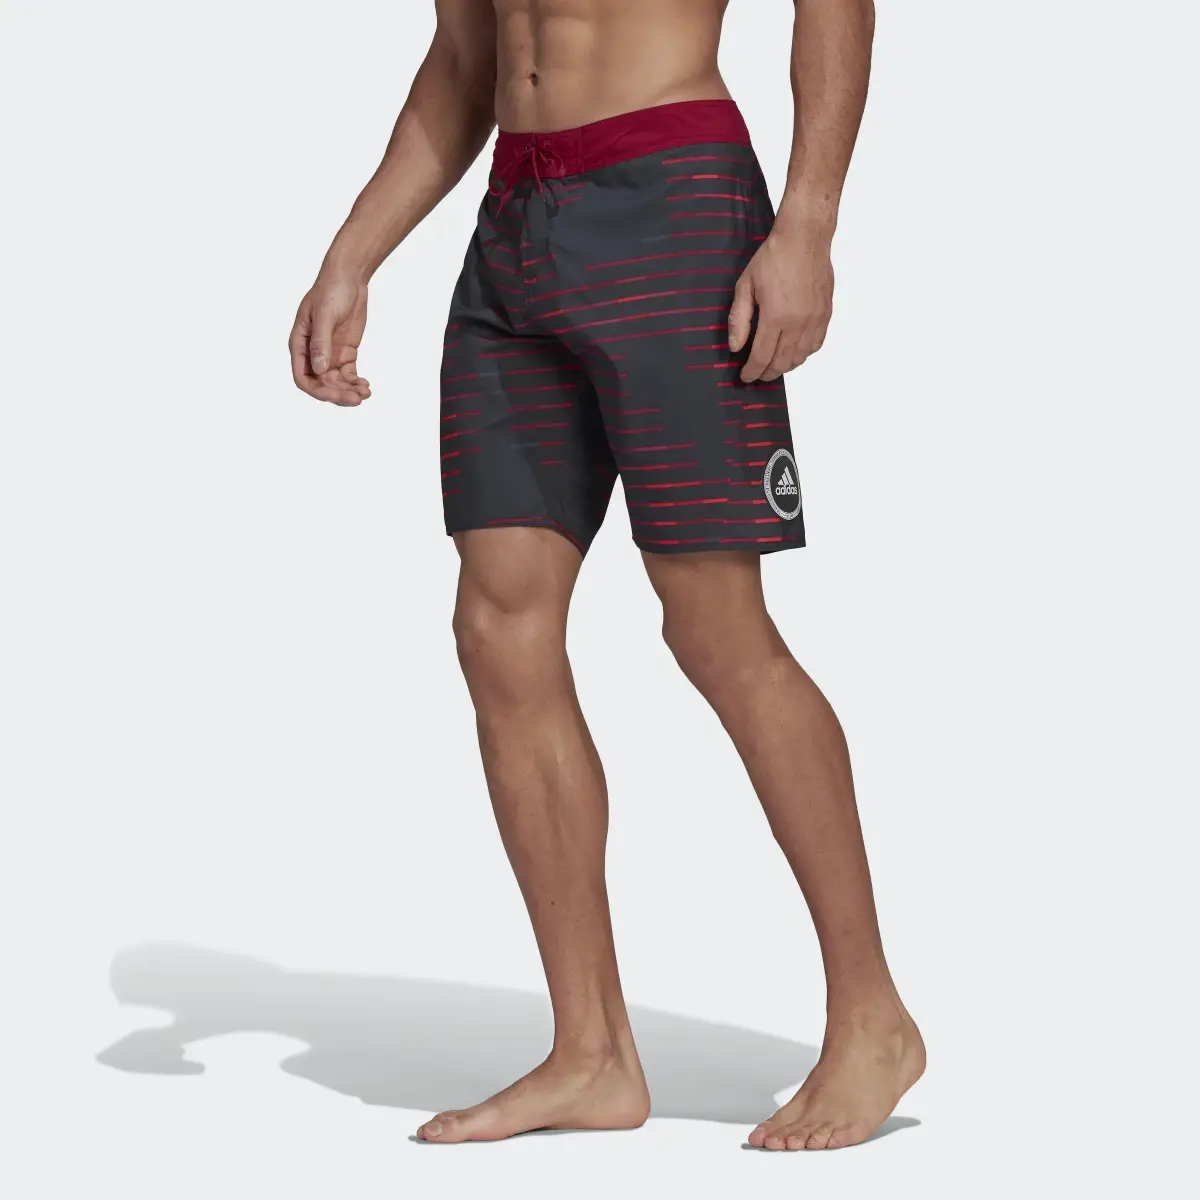 Adidas Classic Length Melbourne Graphic Board Shorts. 1